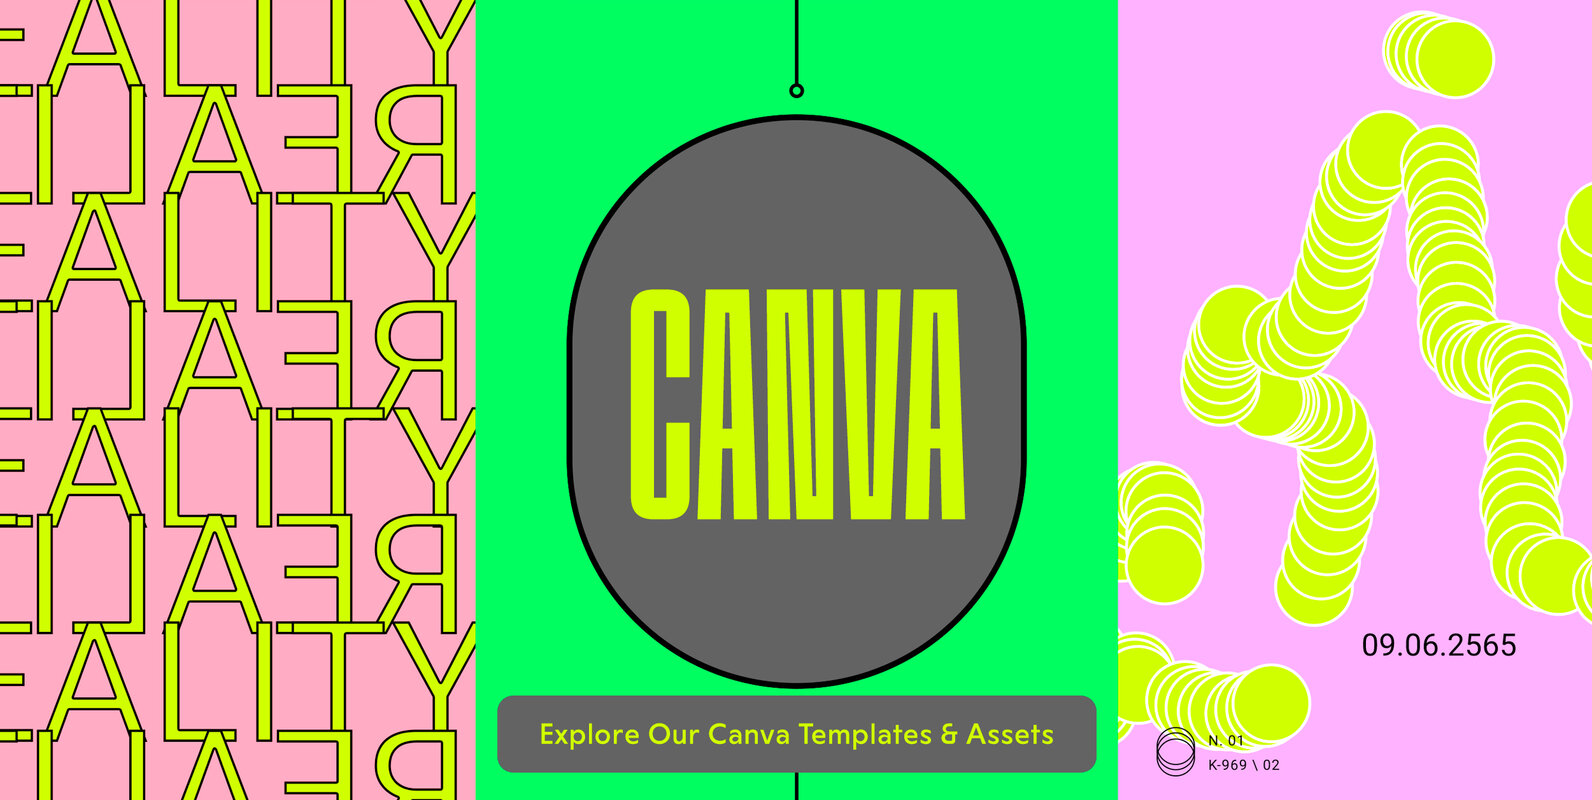 Download Premium Canva Templates and Assets